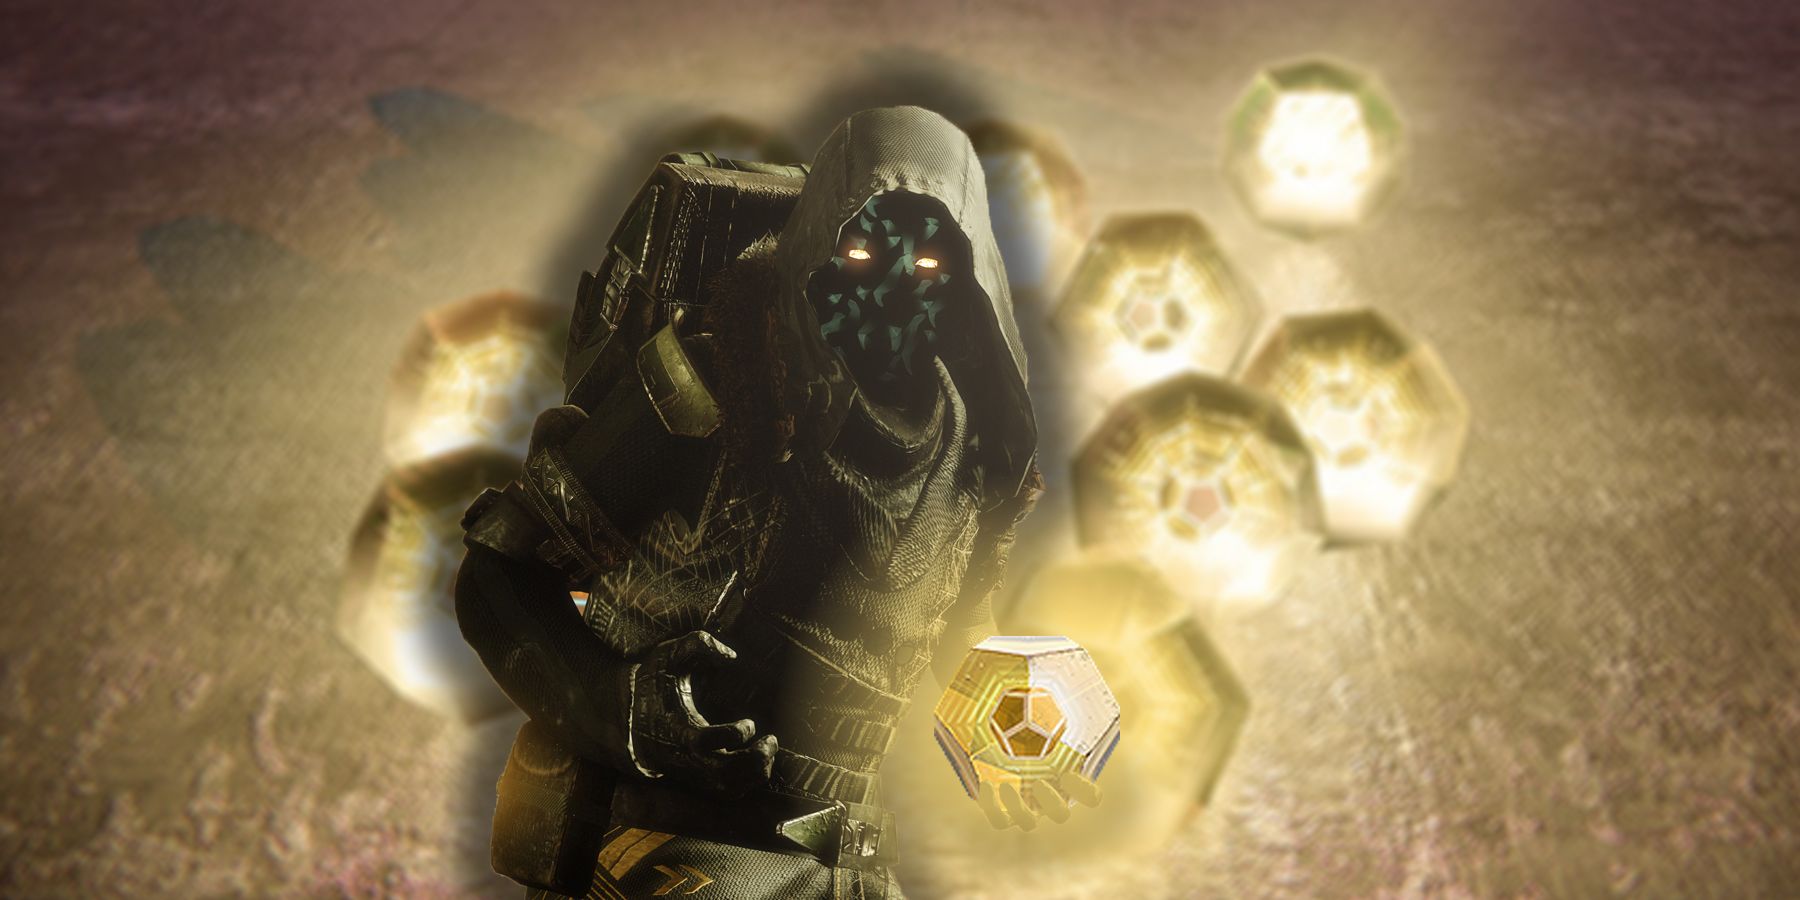 Xur is holding an Exotic Engram in Destiny 2 with a bunch of Exotic Engrams behind him.